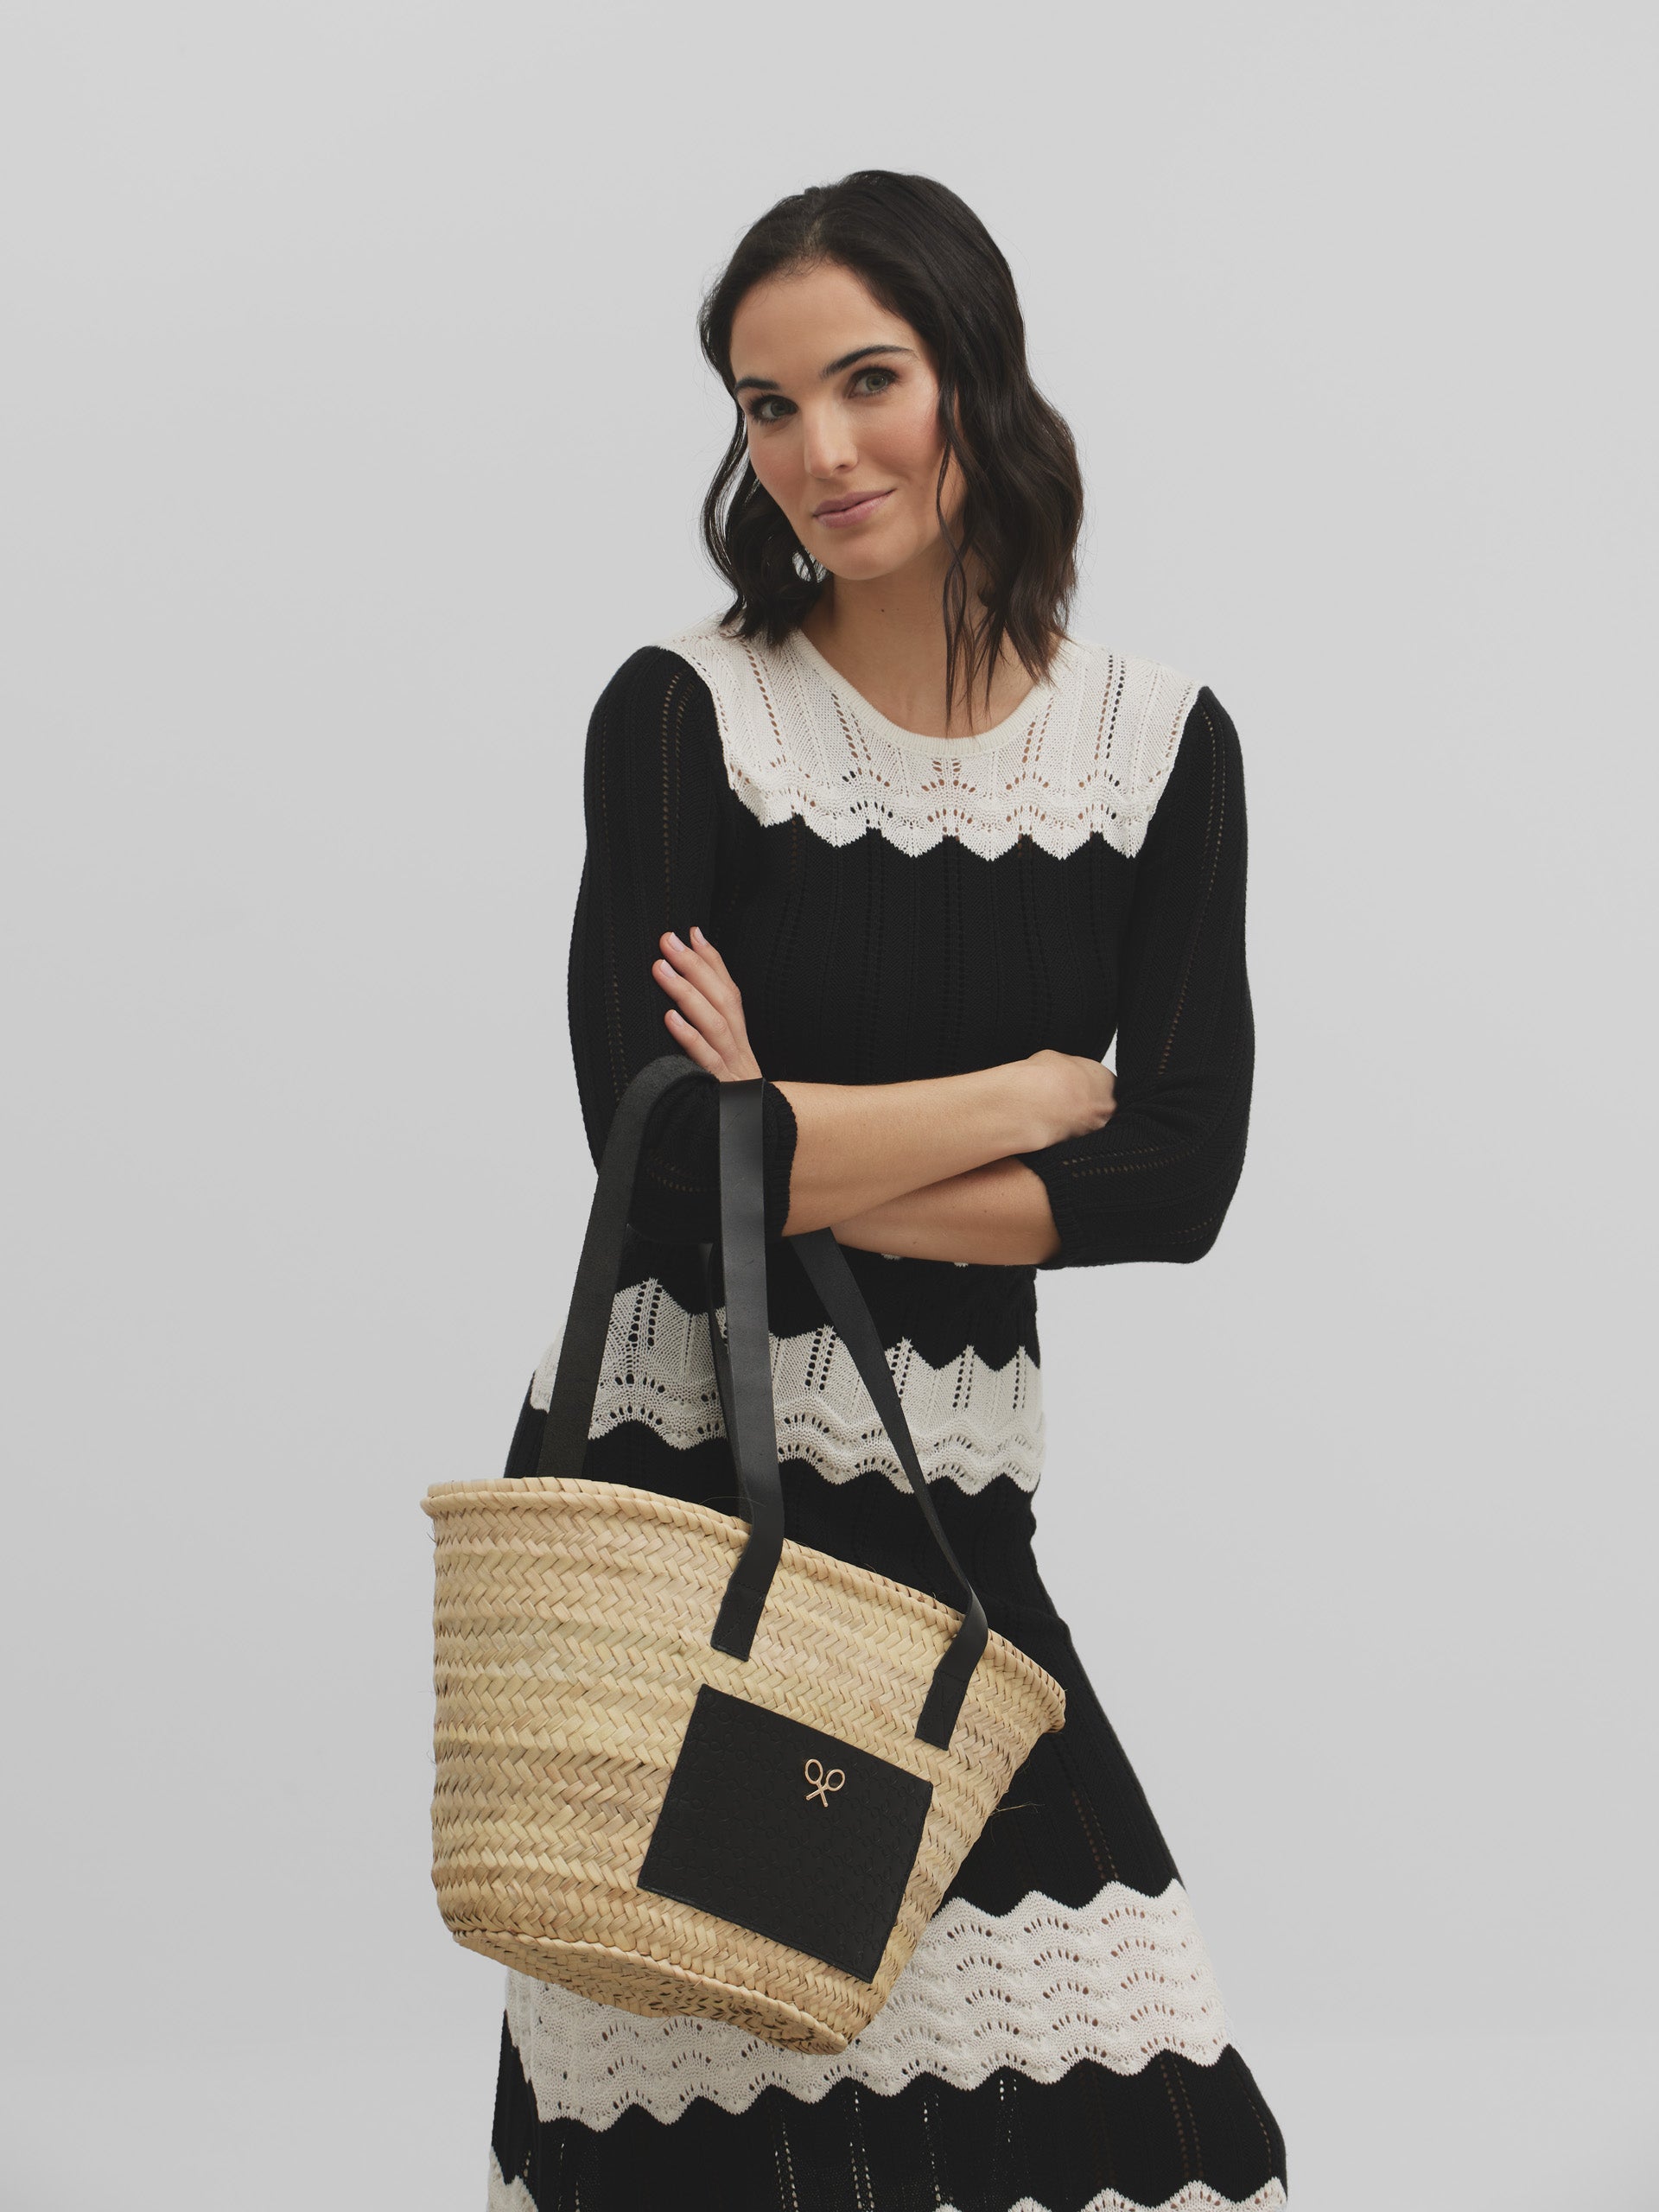 Black and white French sleeve knit dress